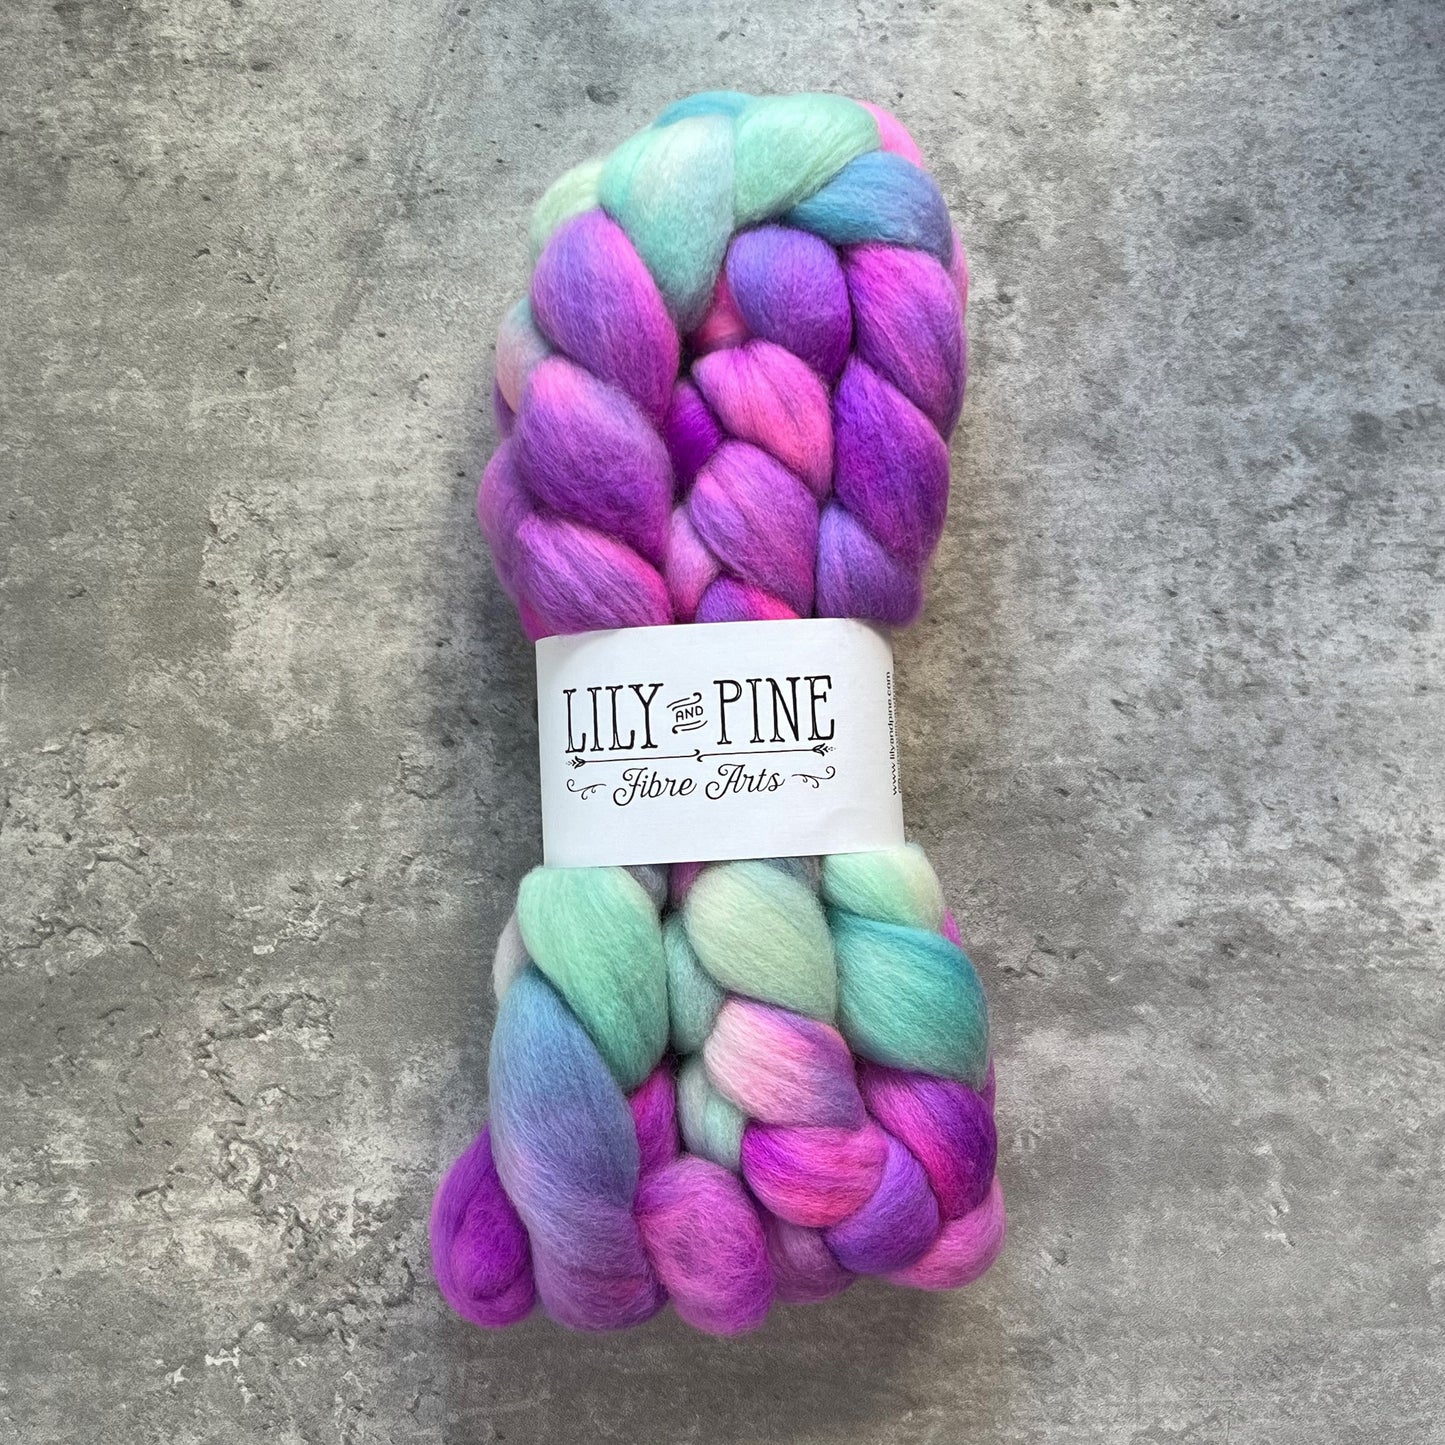 Lily & Pine 100% Merino Combed top- variegated